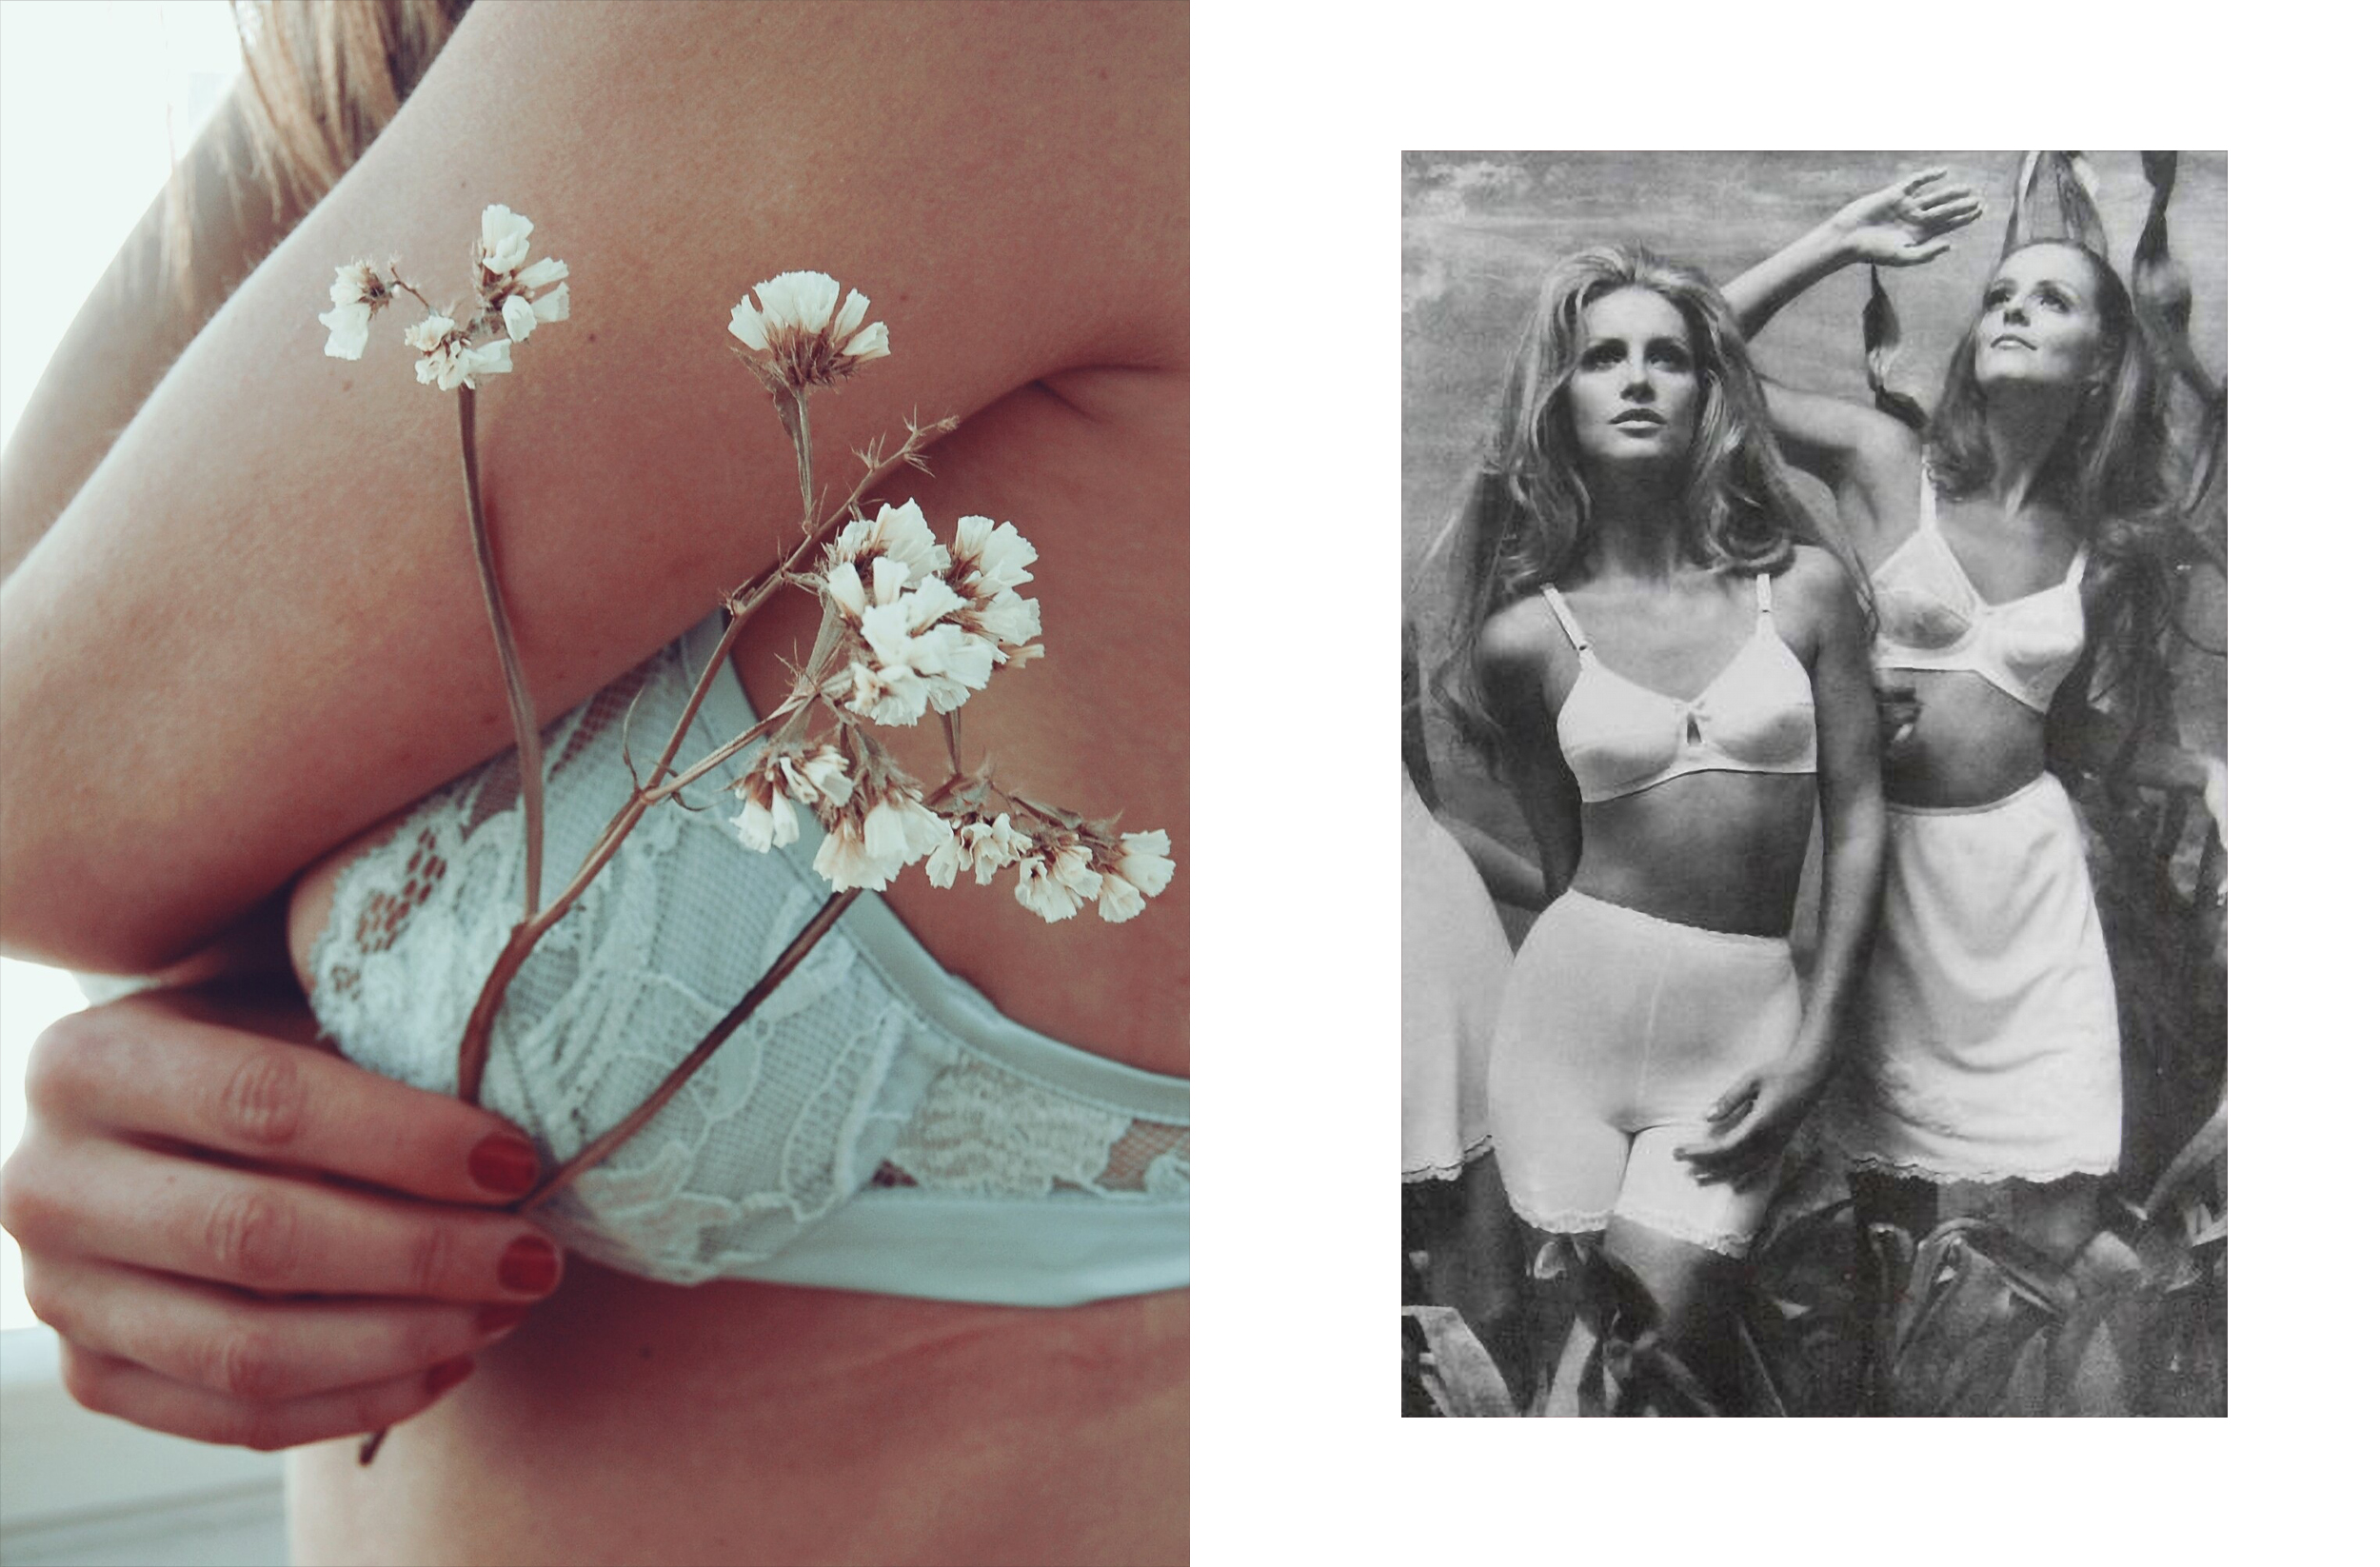 Luxury Lingerie Stories; The History of the Bra